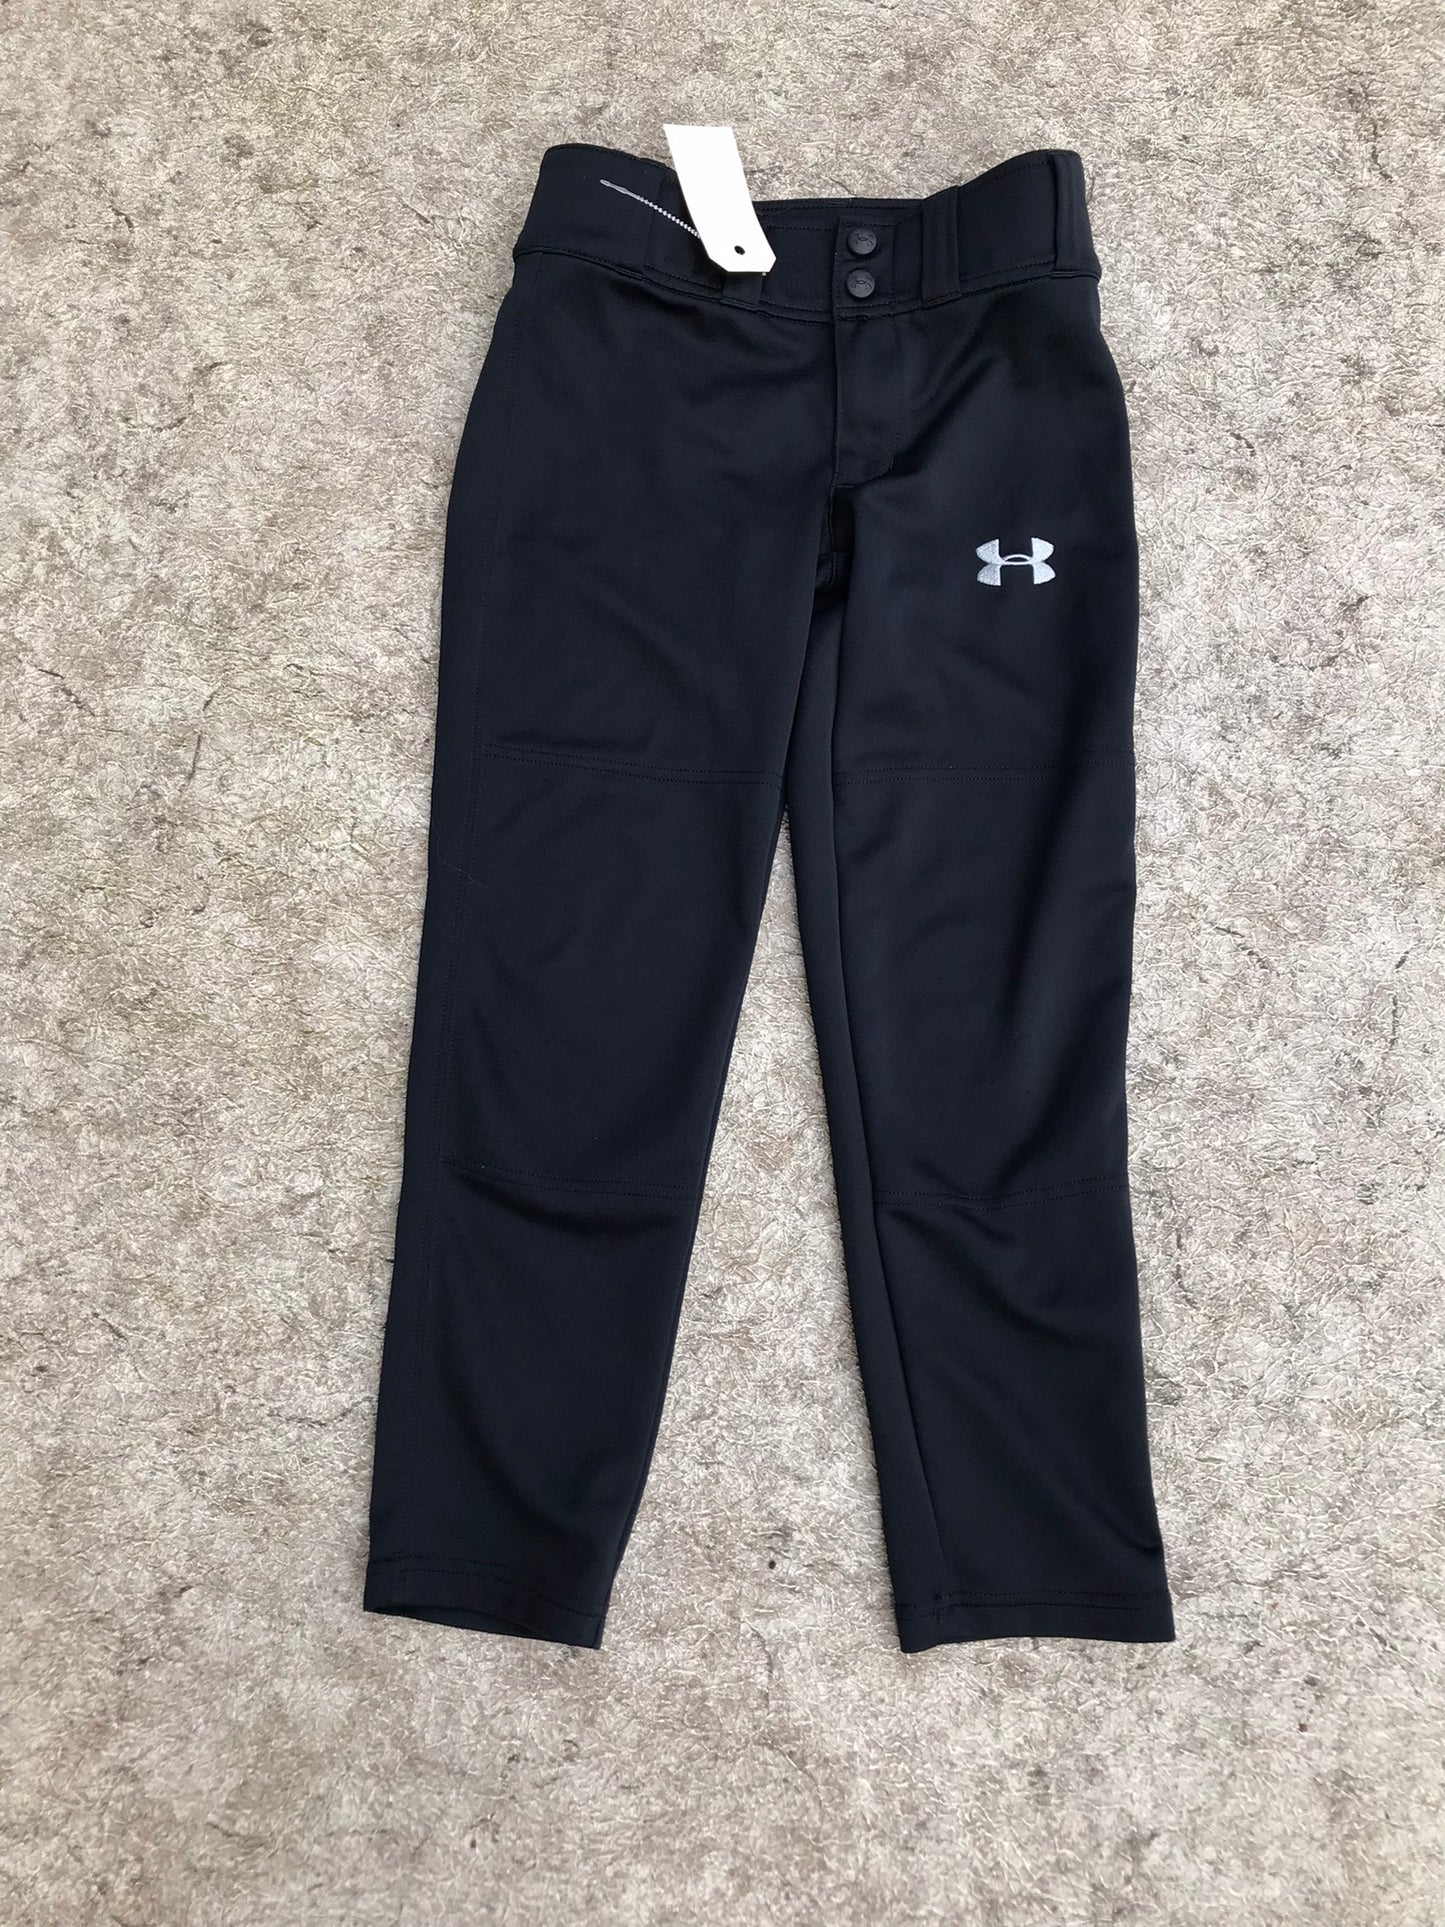 Baseball Pants Child Size Youth 6-8 Under Armour Black New Demo Model